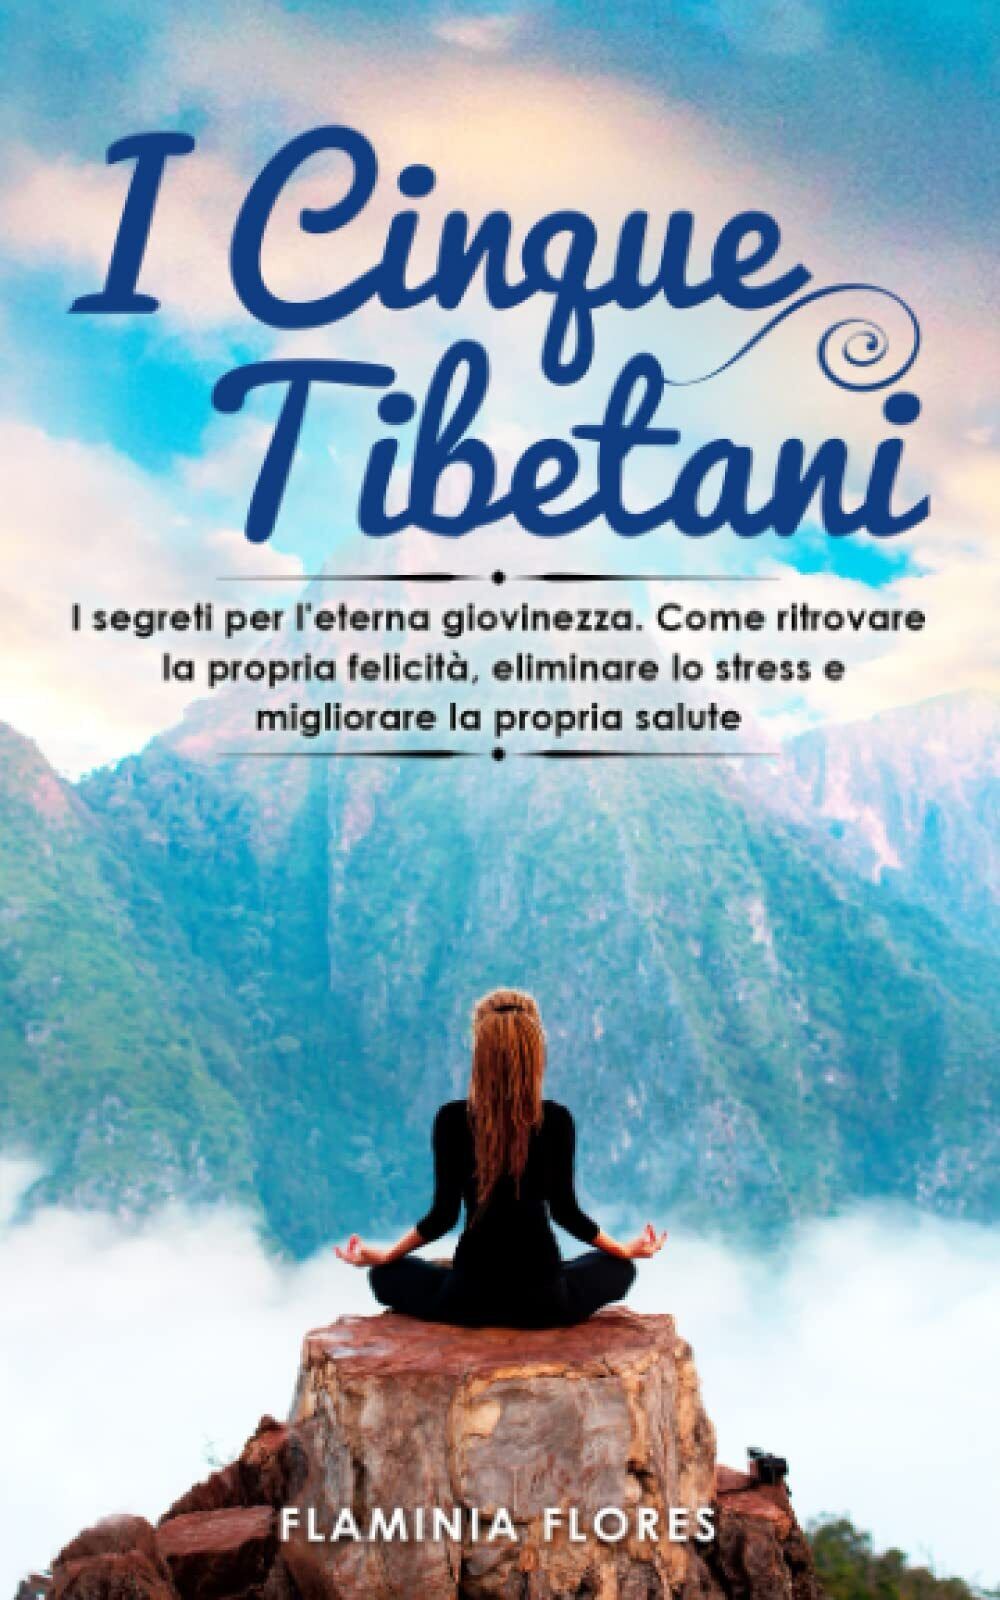 I cinque tibetani - Flaminia Flores - Independently published, 2021